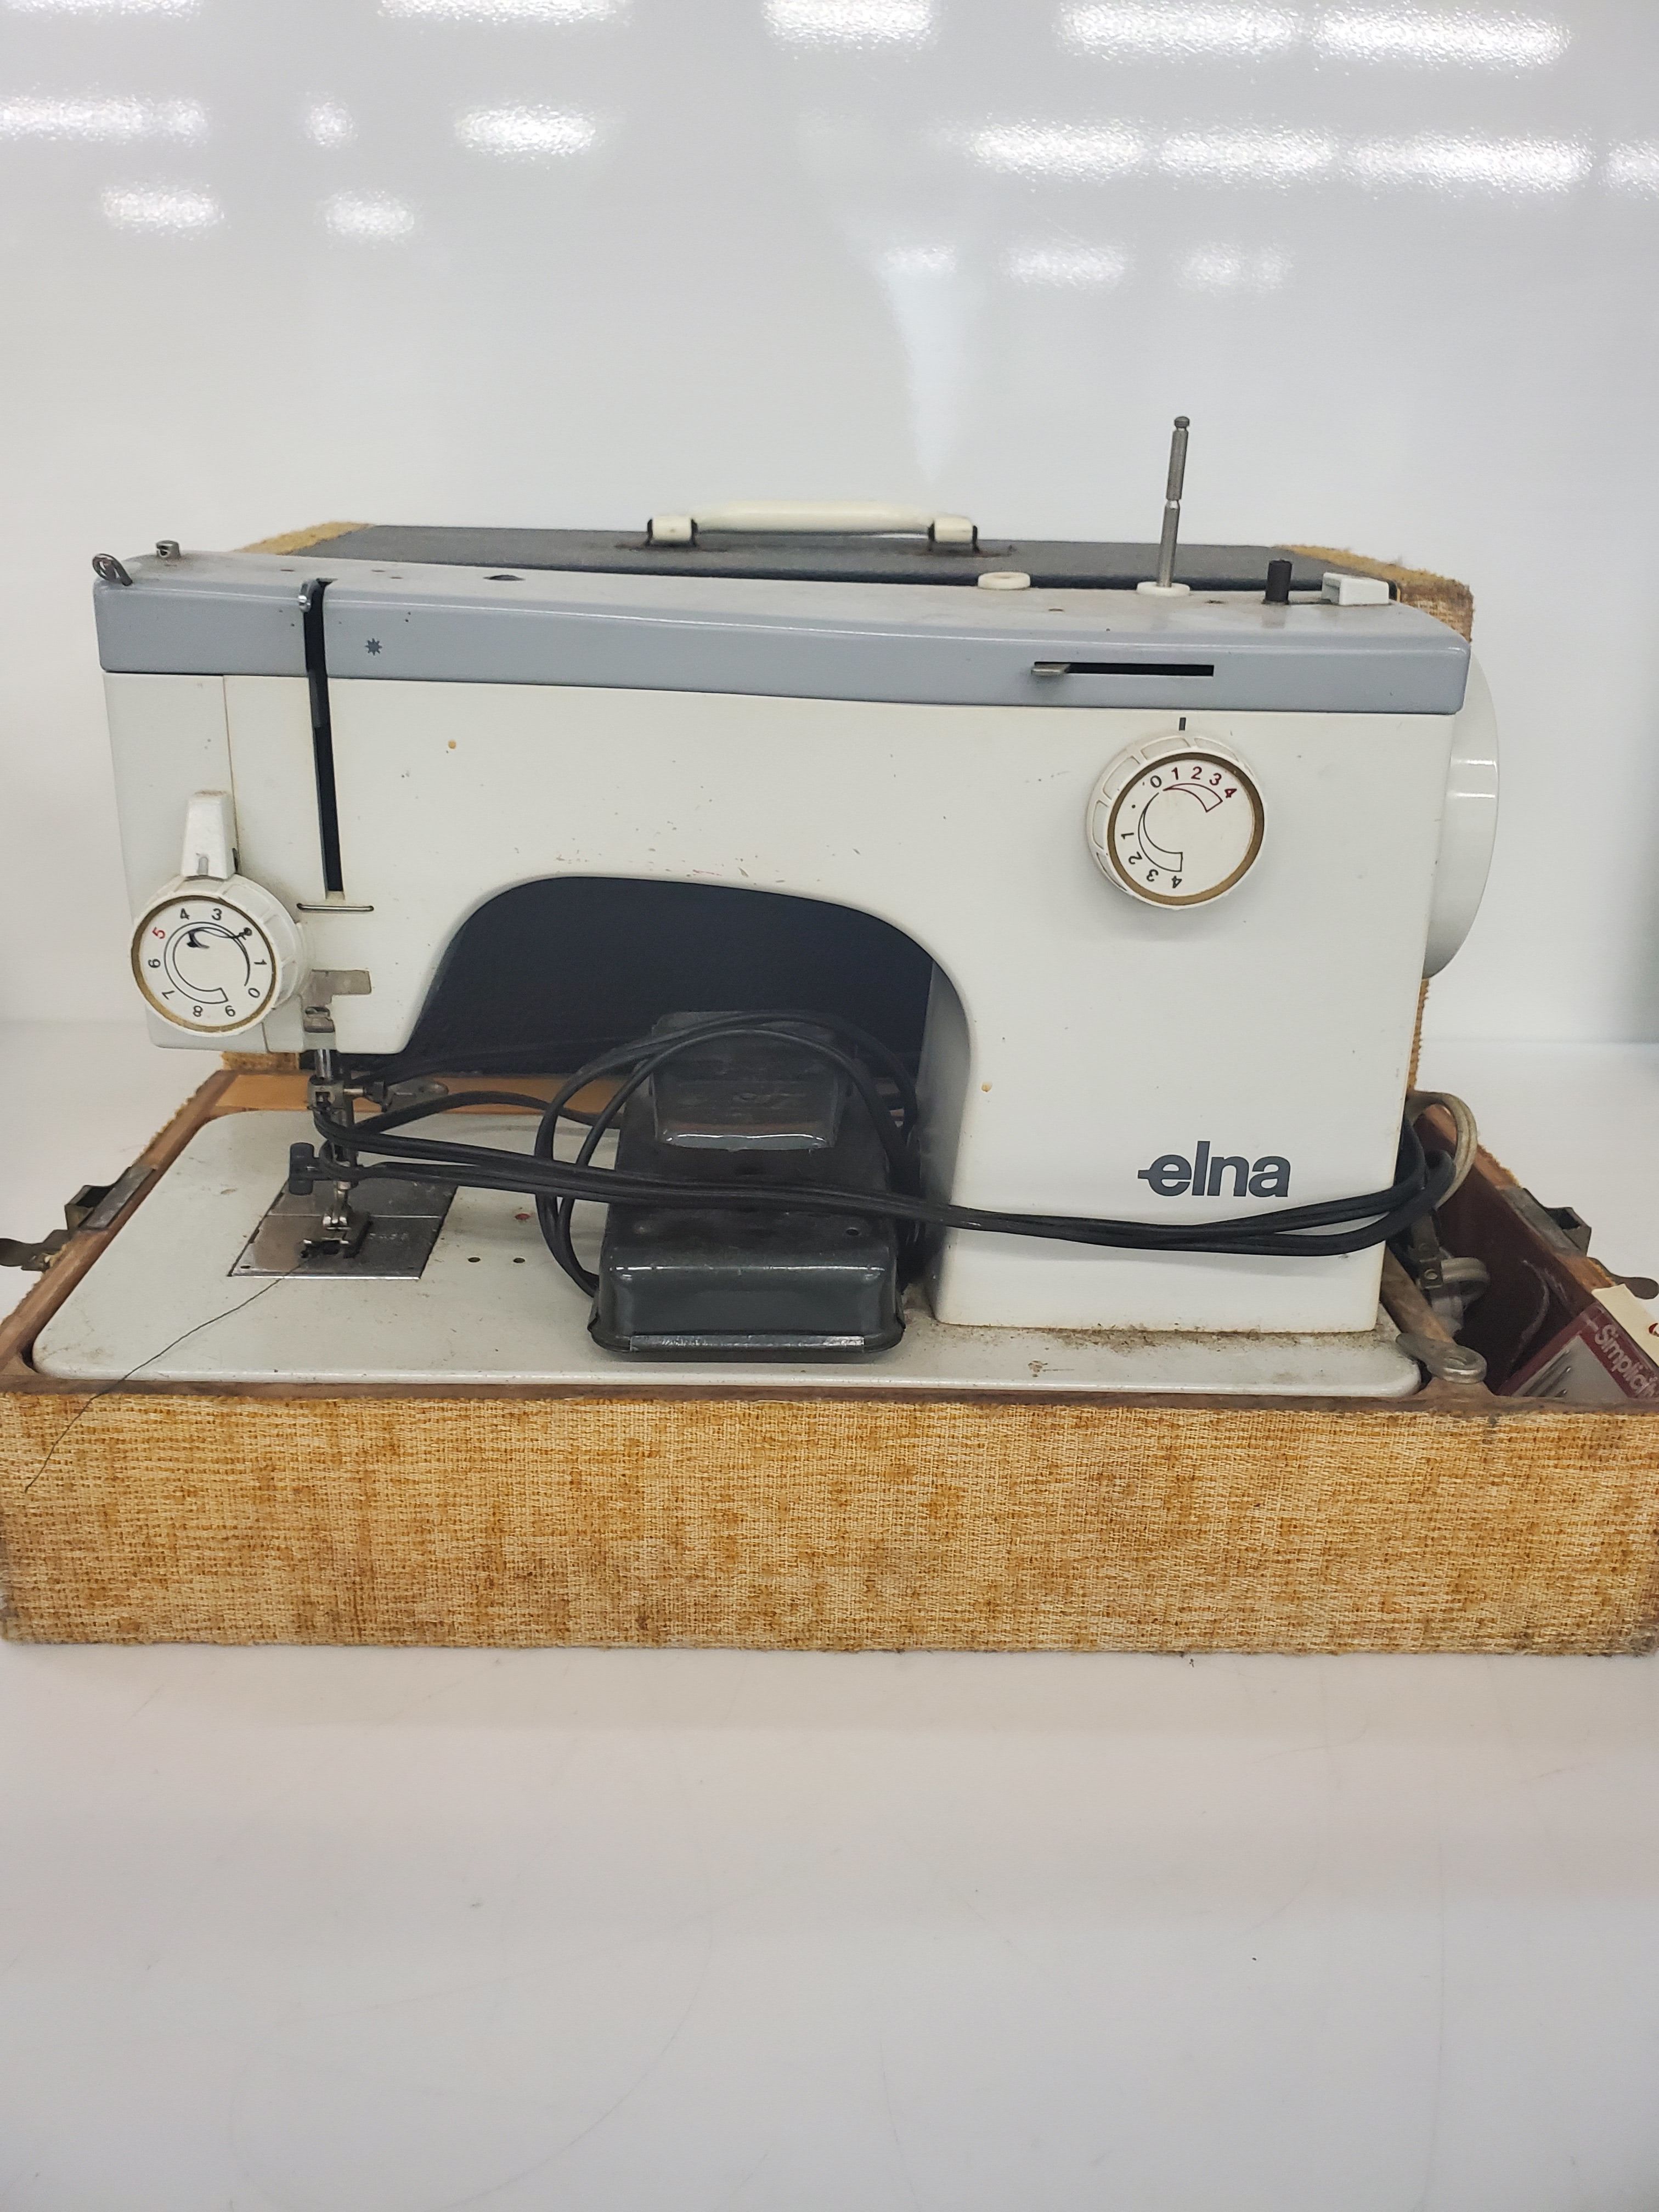 1959 Elna Sewing Machine: Gives You All 3 Vintage Print Ad